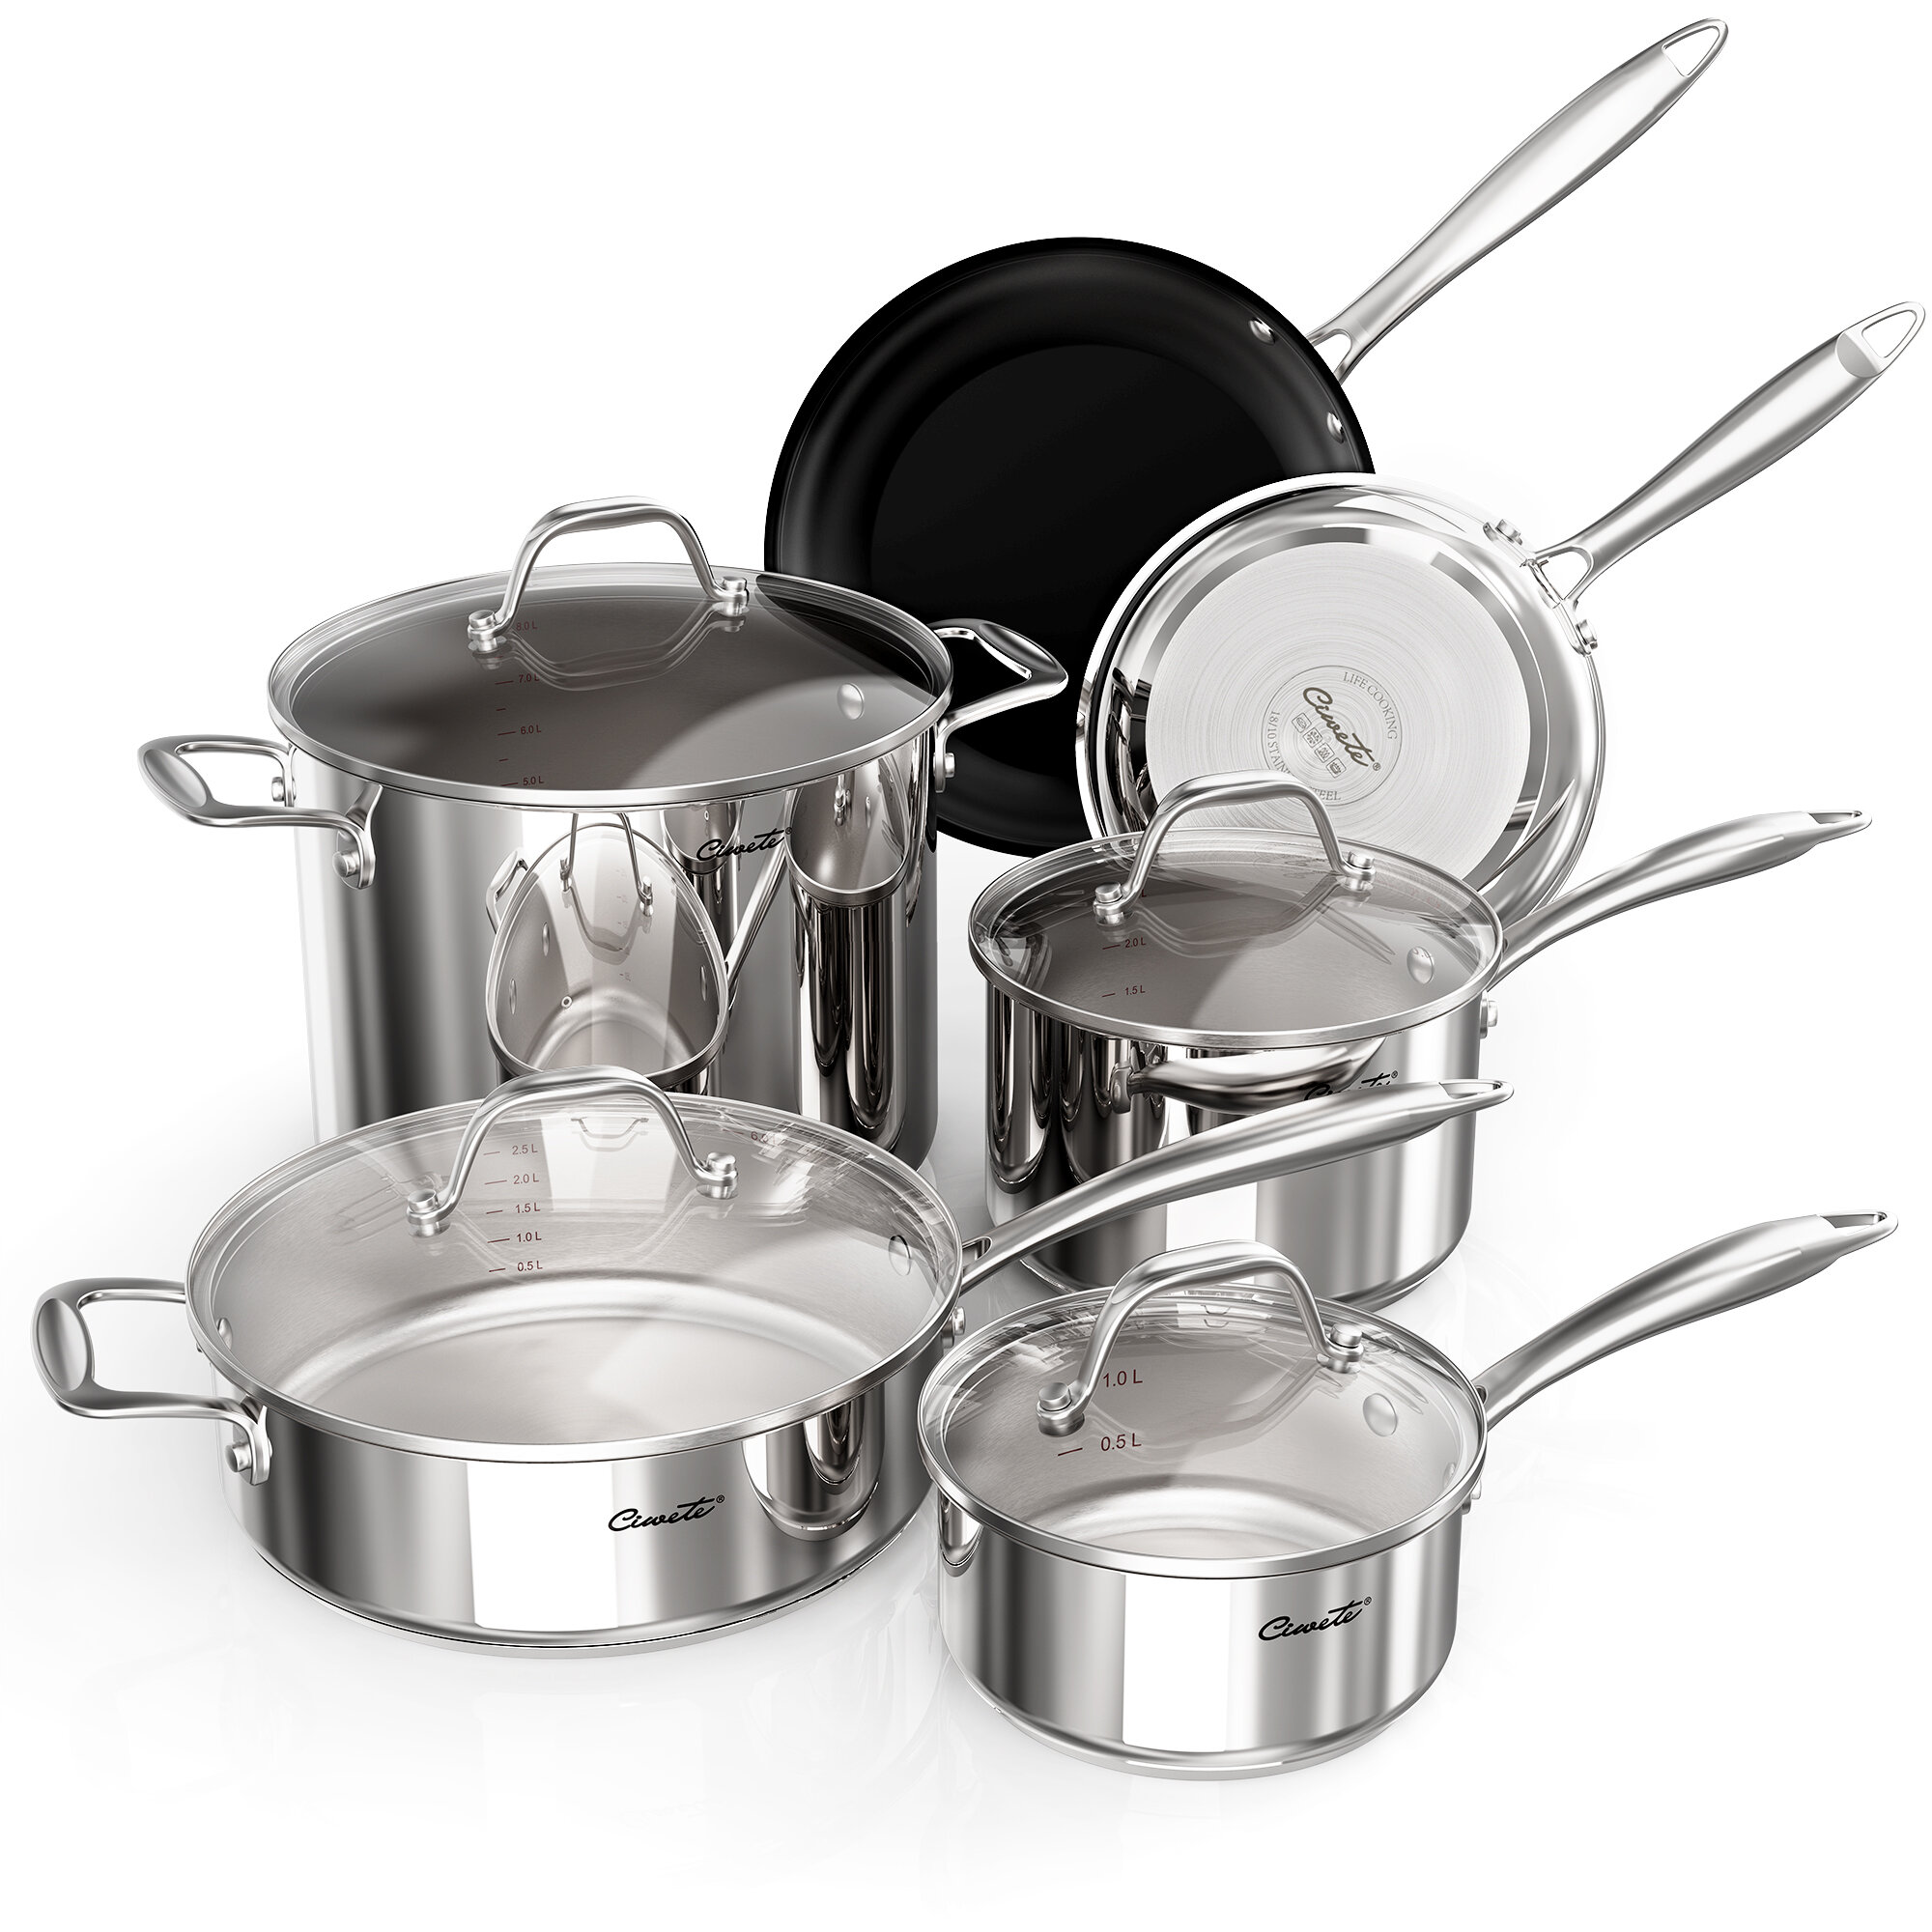 Pots and Pans Junior 10 Pieces Stainless Steel Non Stick Cookware Set